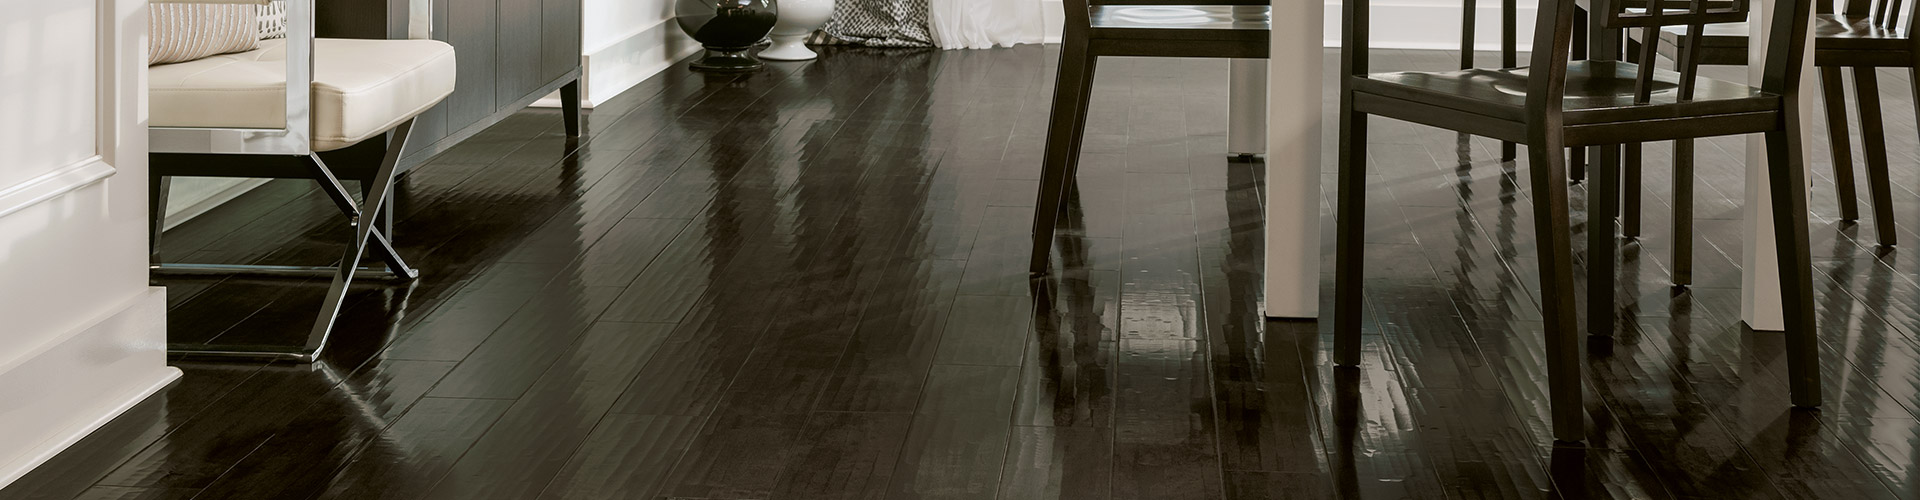 Wood Floor Stain Color Guide - Bona US